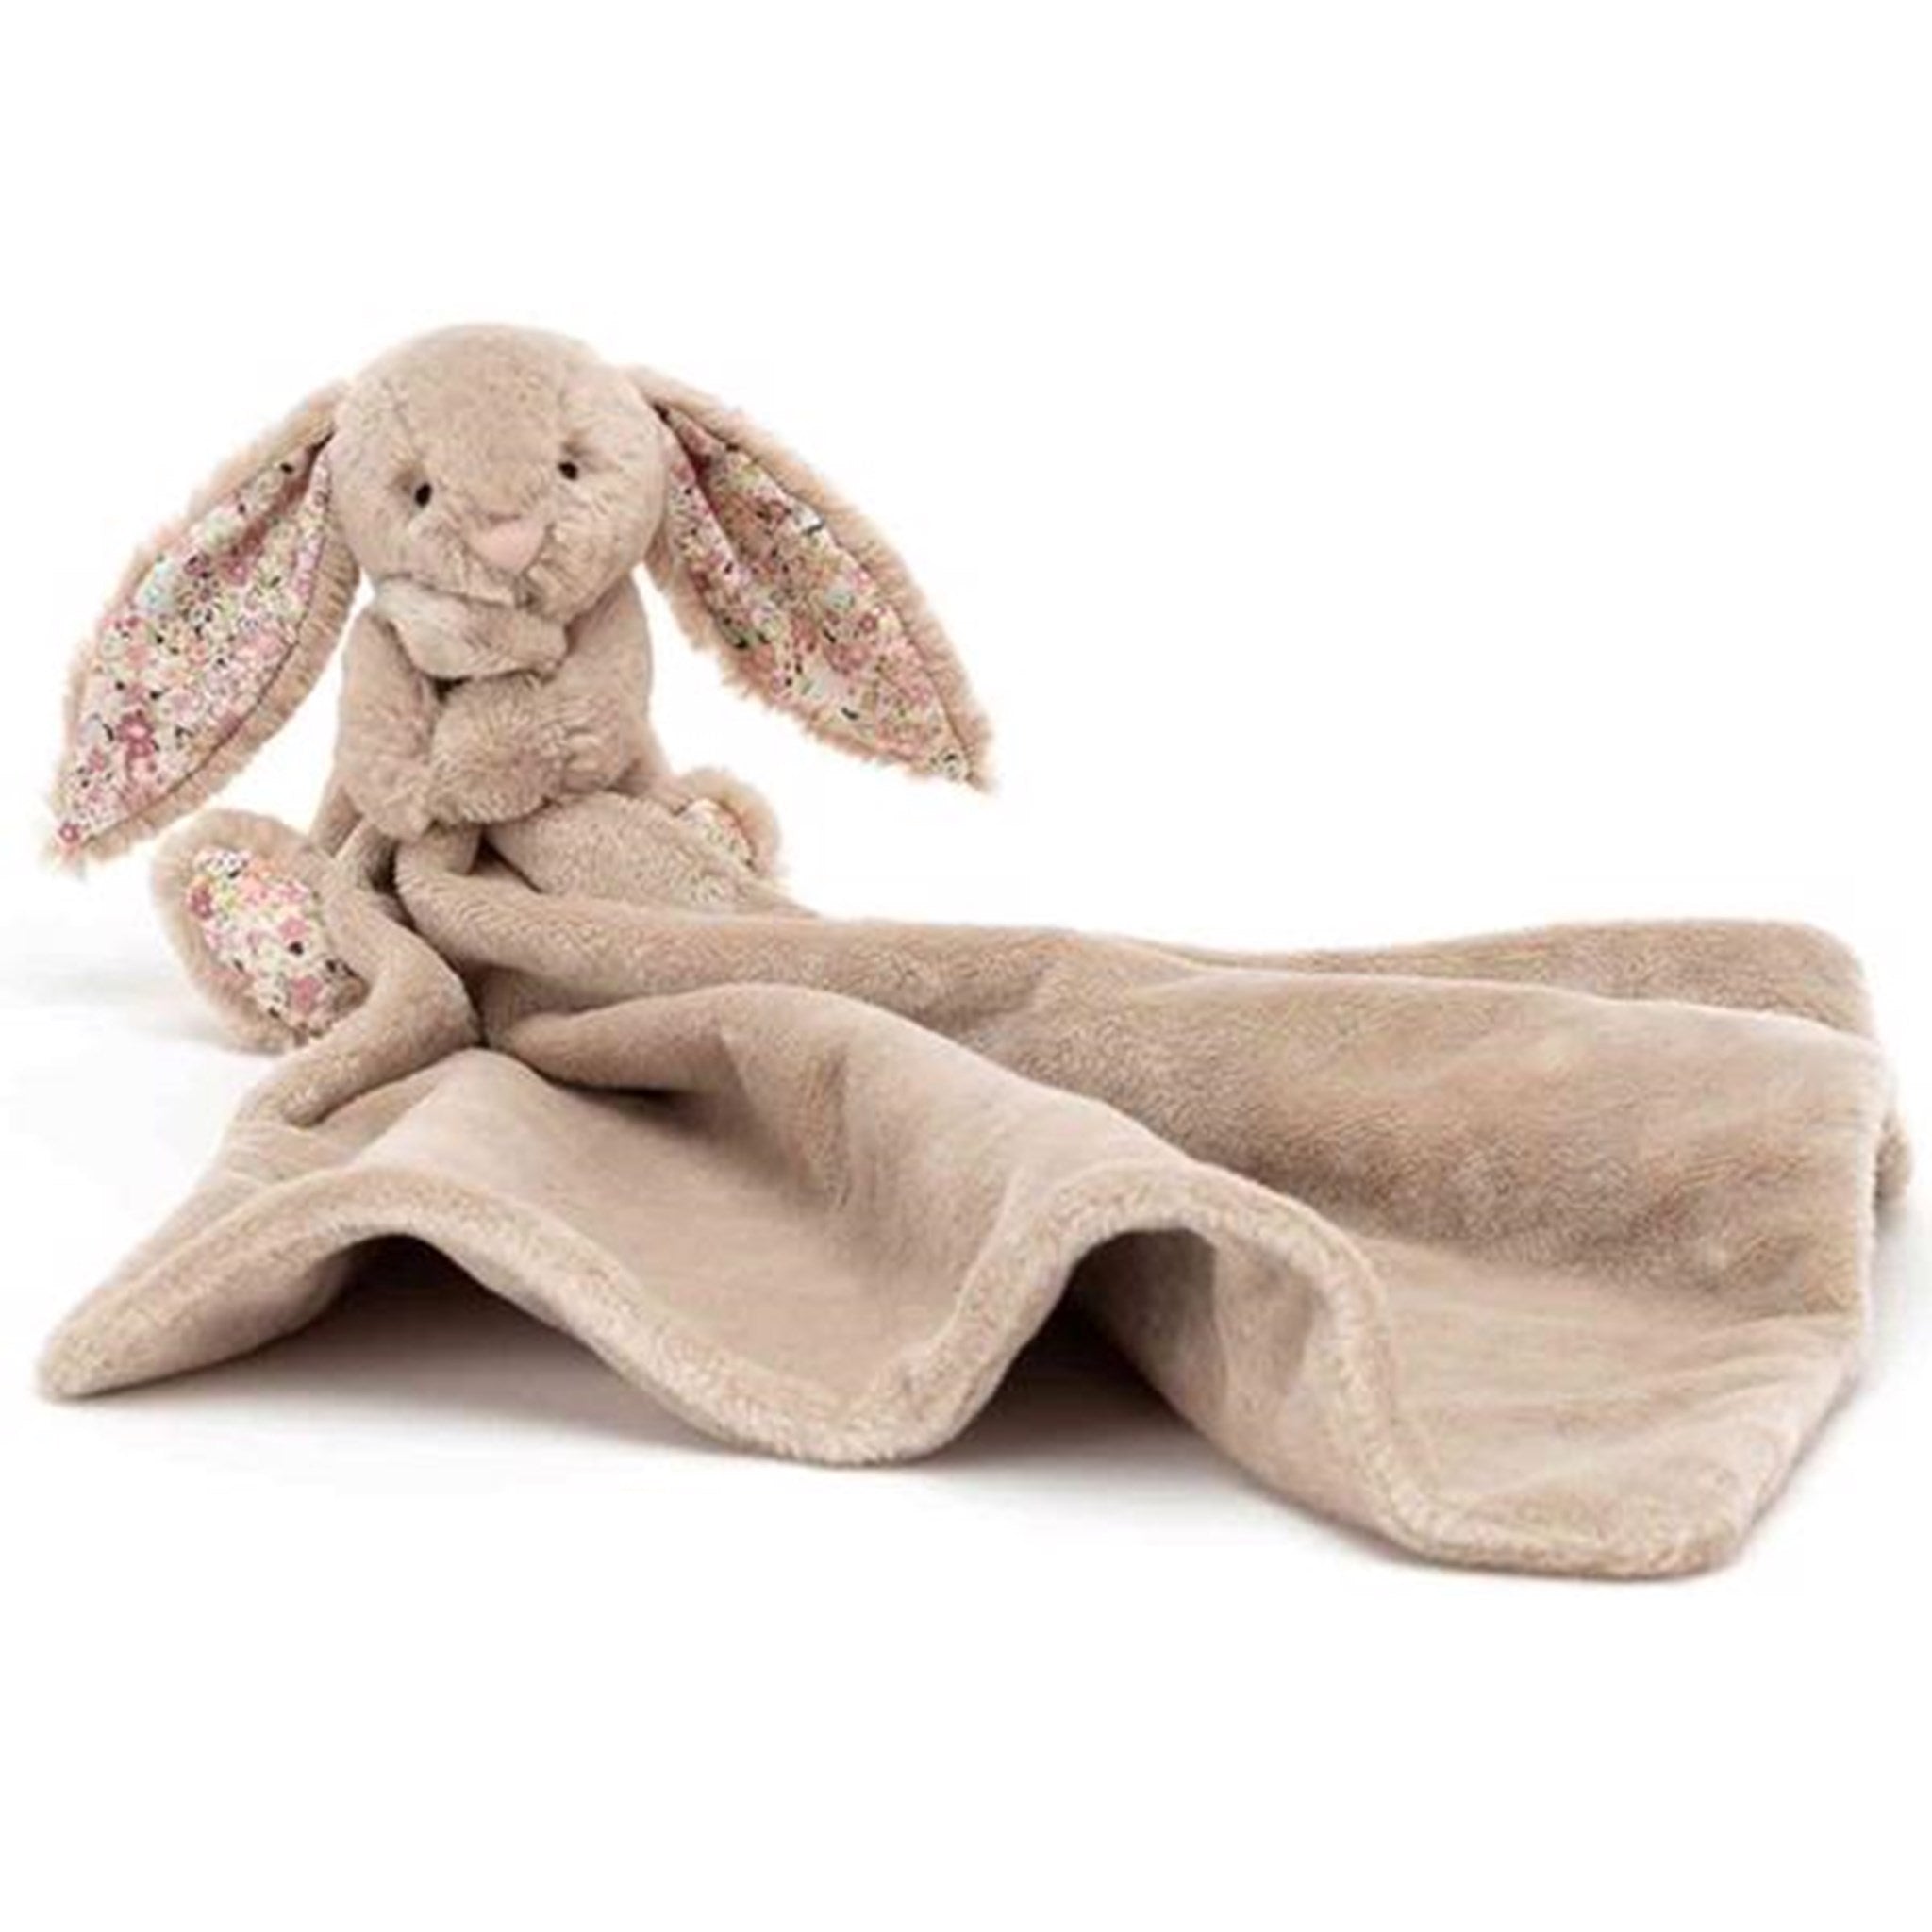 Jellycat Bashful Bunny Soother Blossom Beige 34 cm